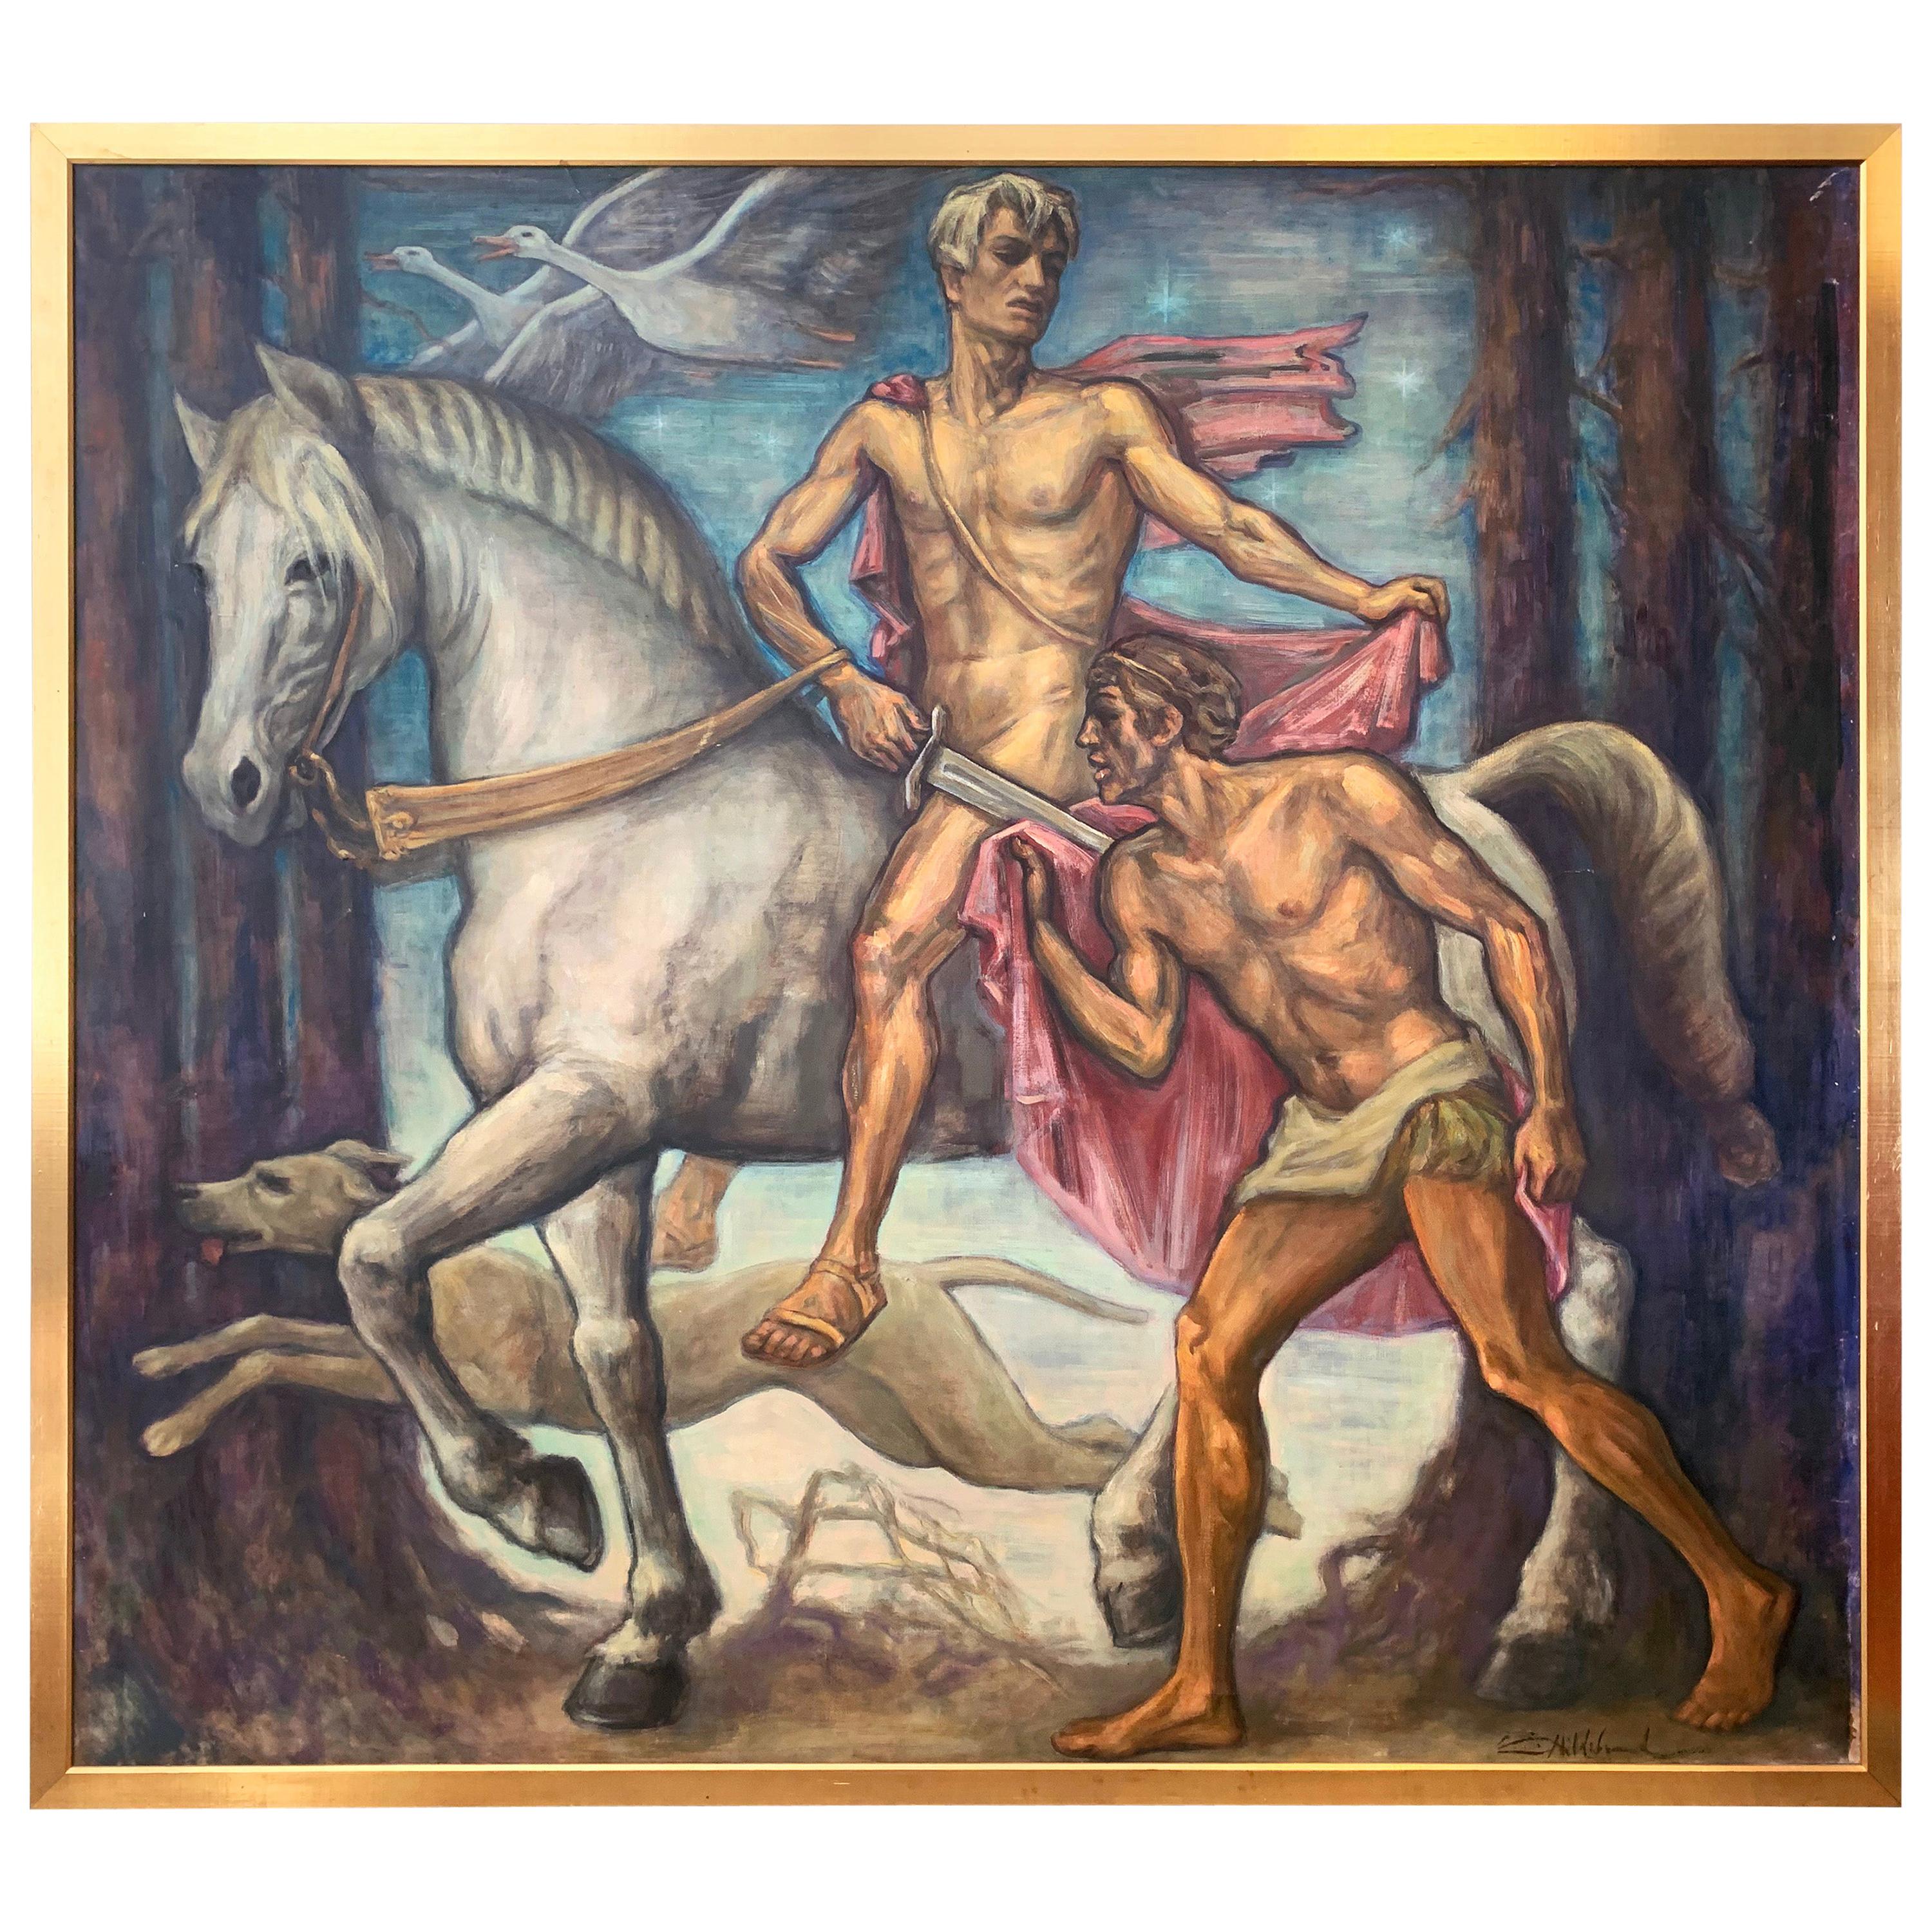 "Dividing His Cloak ," Monumental Art Deco Ptg with Nudes, St. Martin of Tours